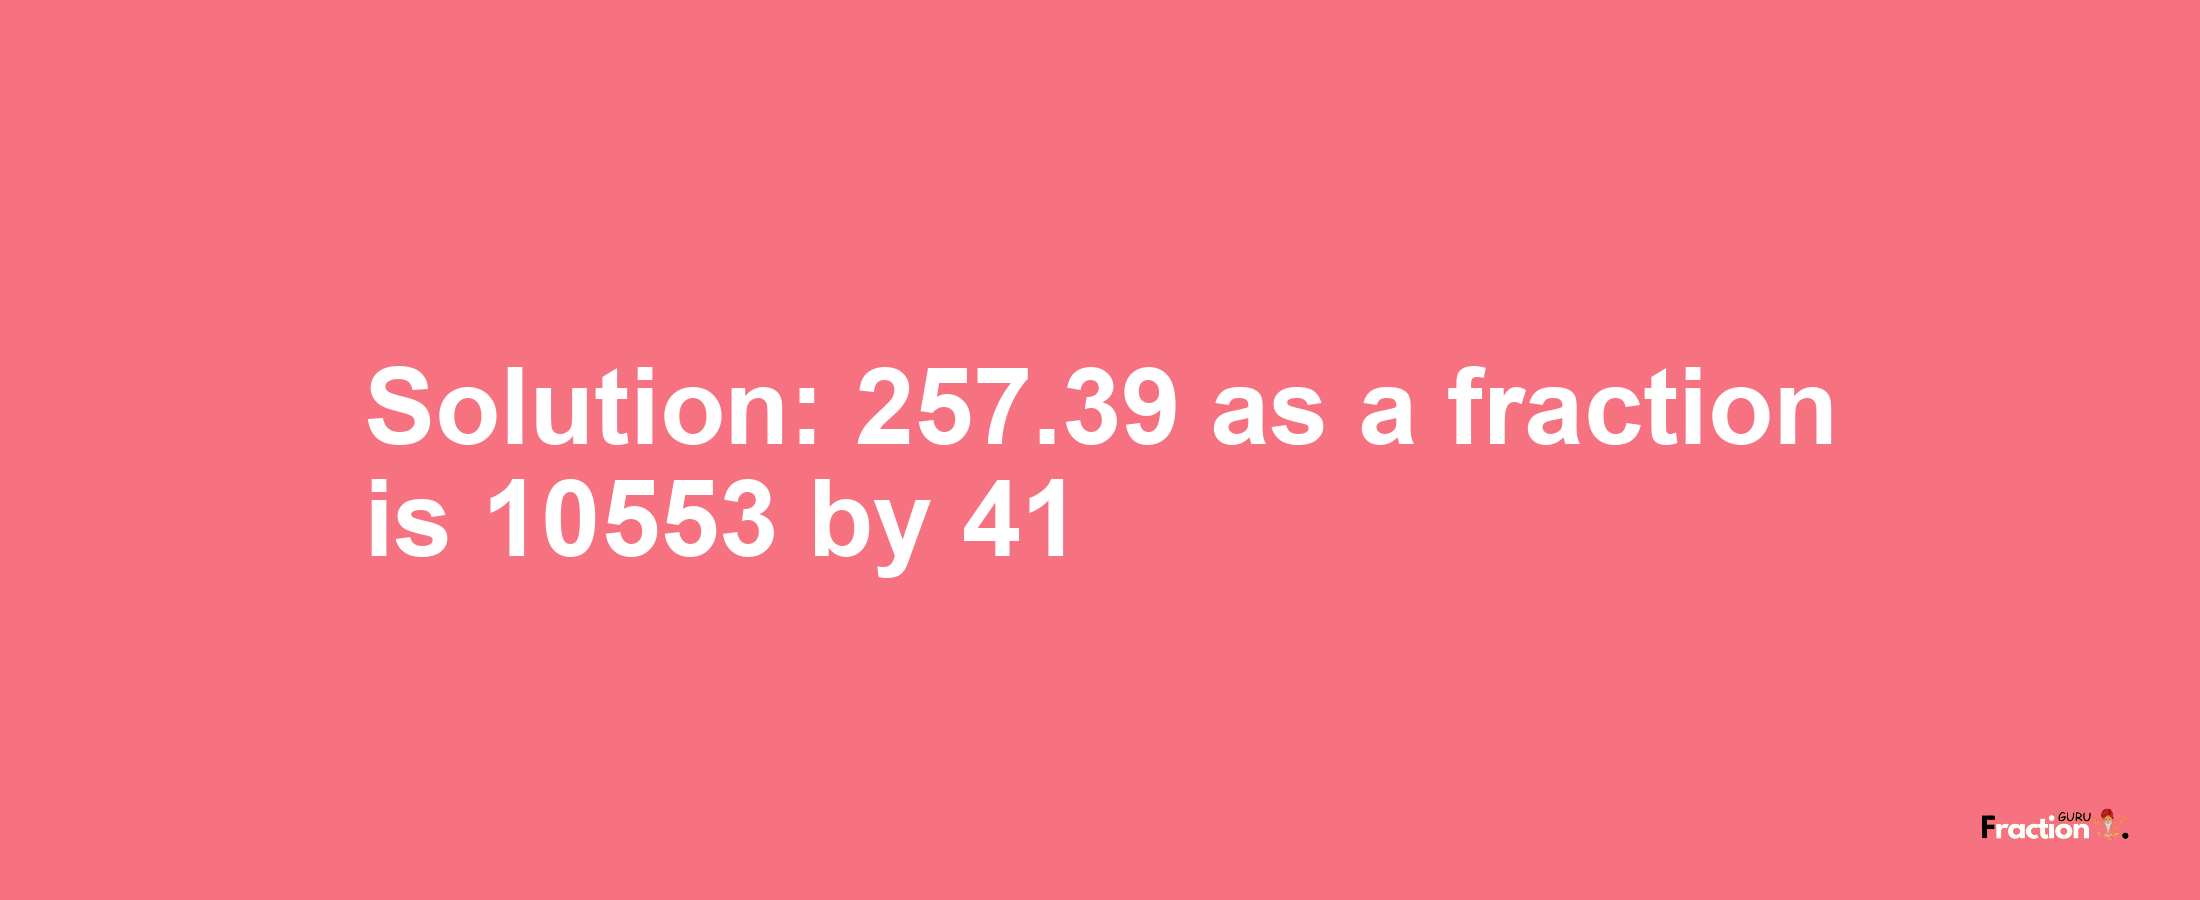 Solution:257.39 as a fraction is 10553/41